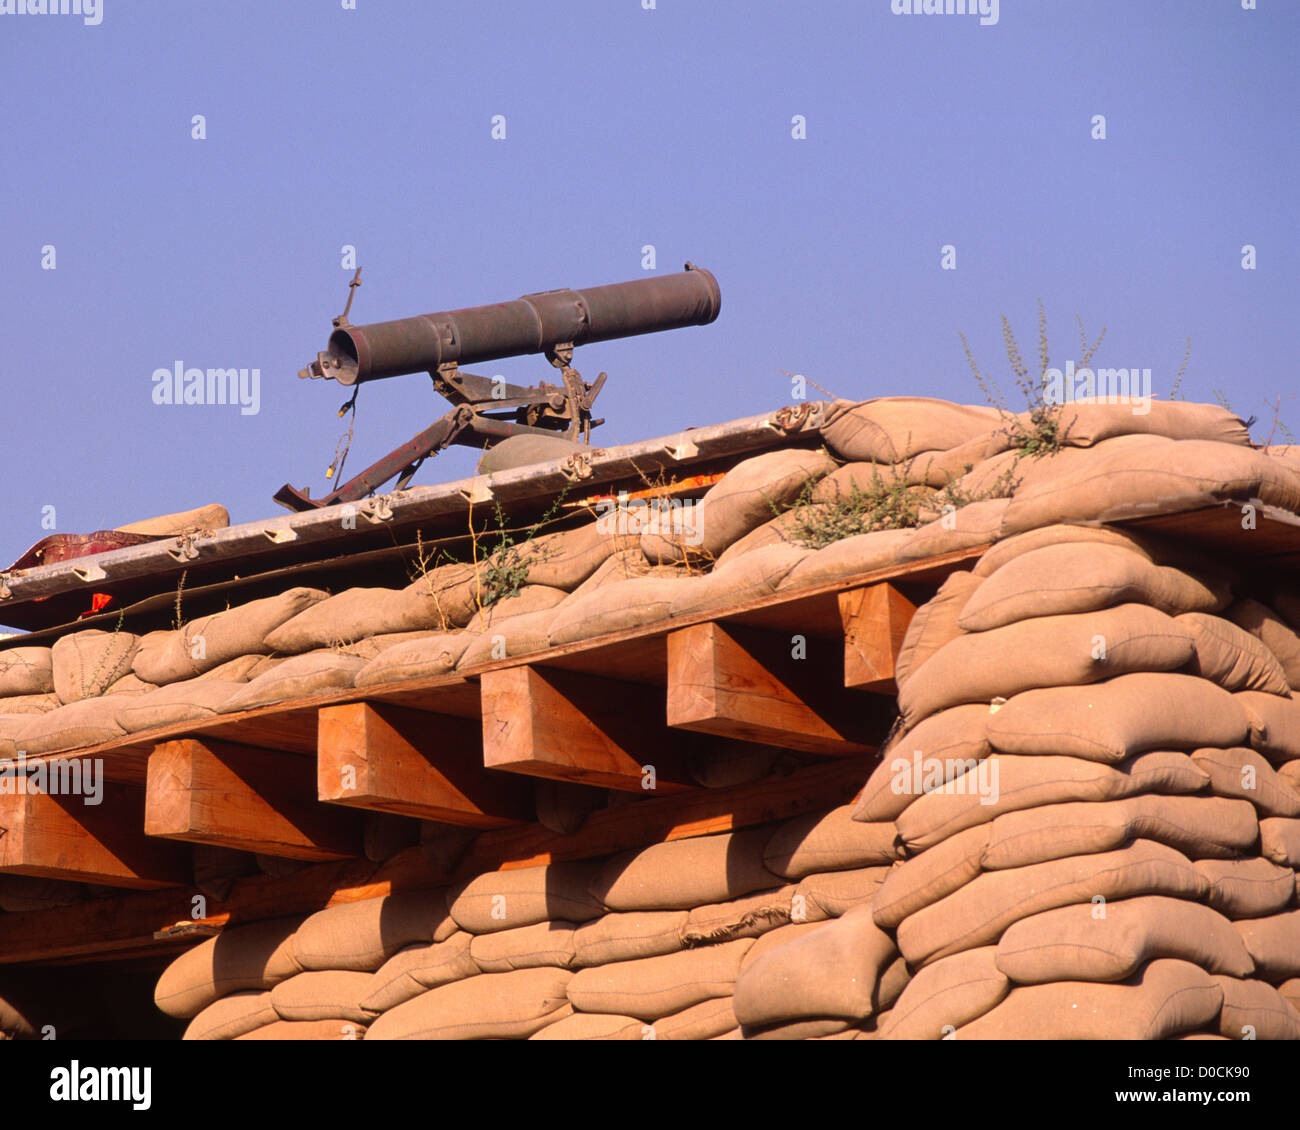 Chinese Manufactured 107mm Rocket Launcher Captured Taliban Stands Ready Atop Sandbagged Bunker Forward Operating Base in Stock Photo